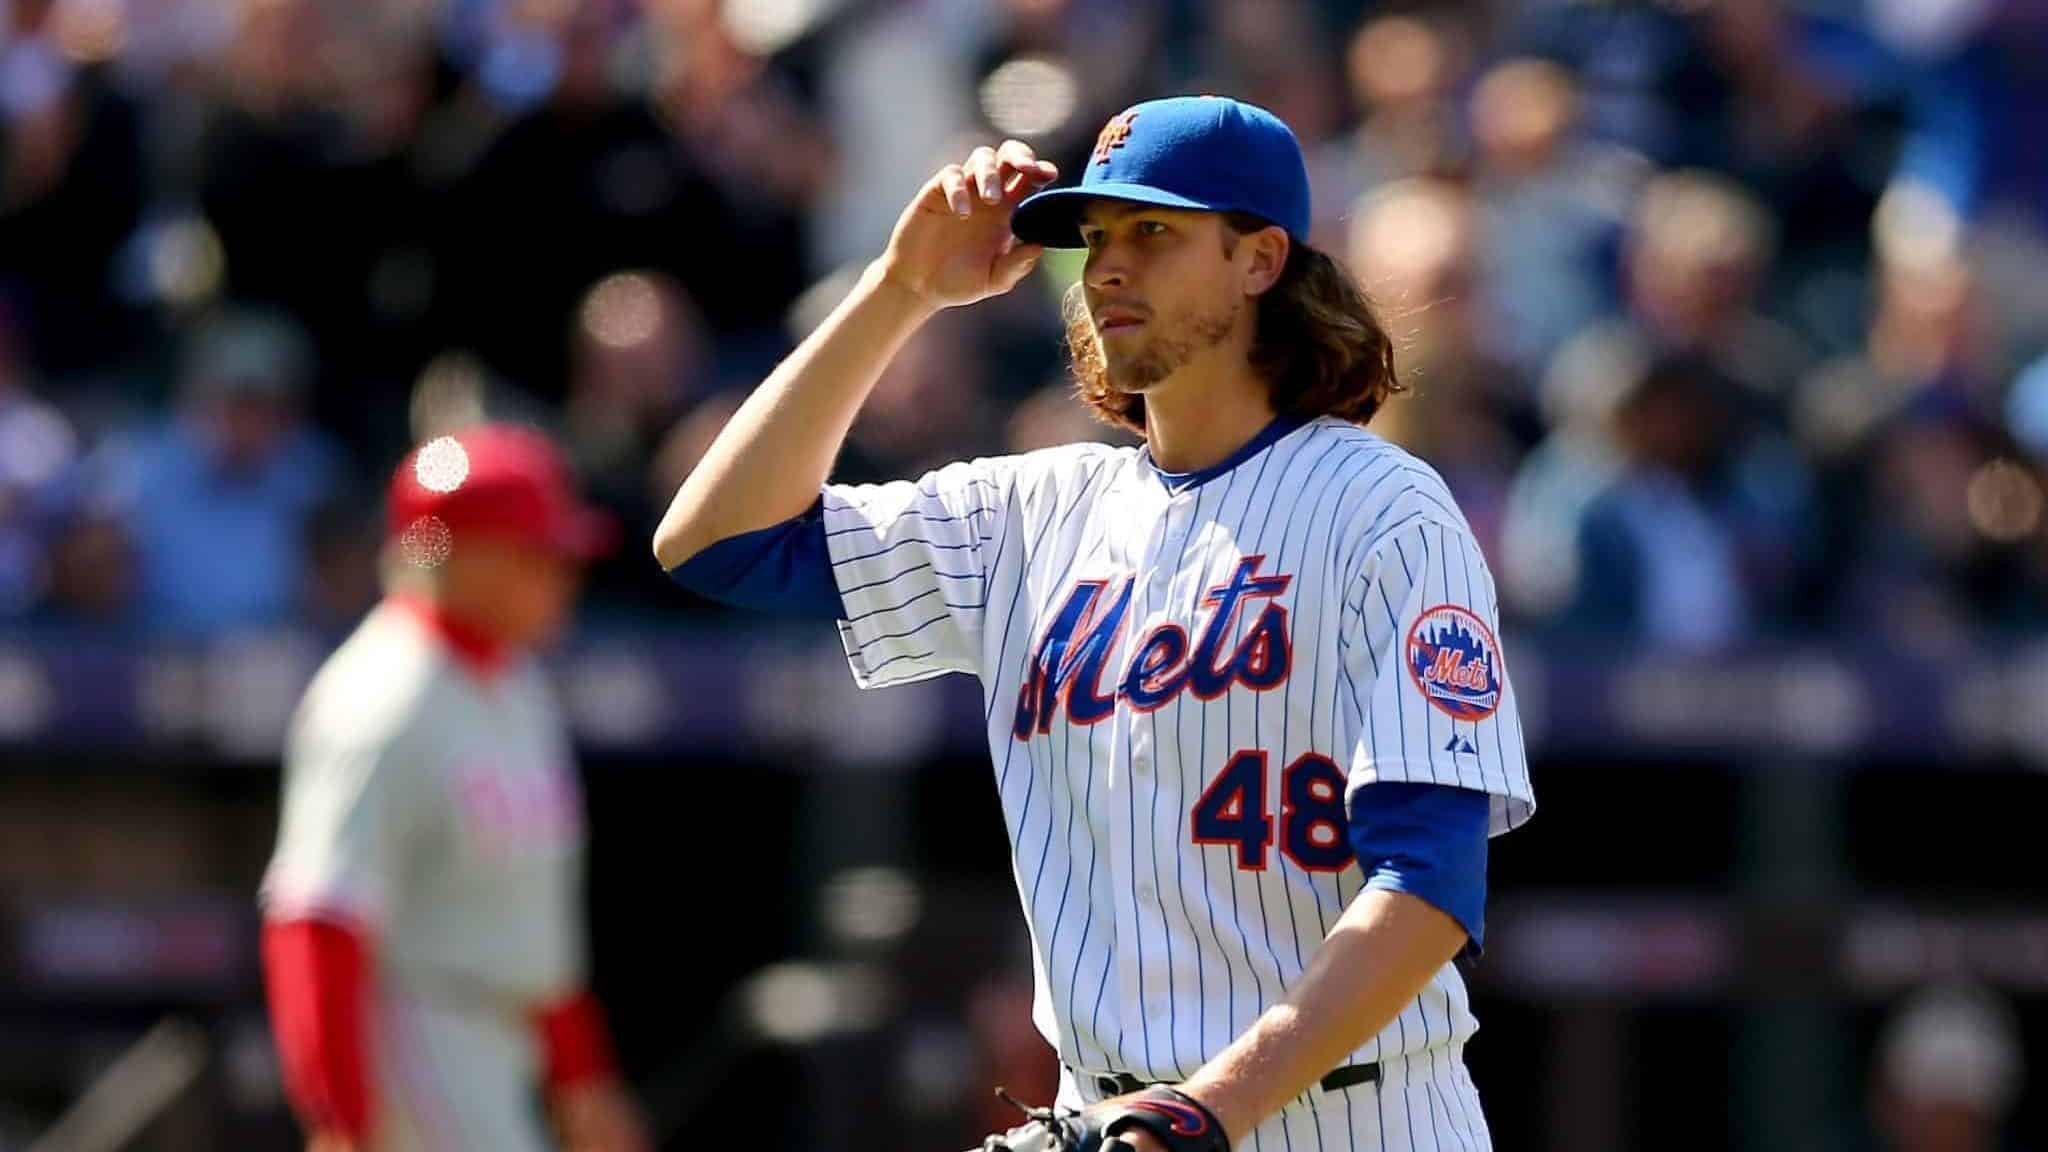 NEW YORK, NY - APRIL 13: Jacob deGrom #48 of the New York Mets salutes the fans as he is pulled from the game in the seventh inning against the Philadelphia Phillies during Opening Day on April 13, 2015 at Citi Field in the Flushing neighborhood of the Queens borough of New York City.